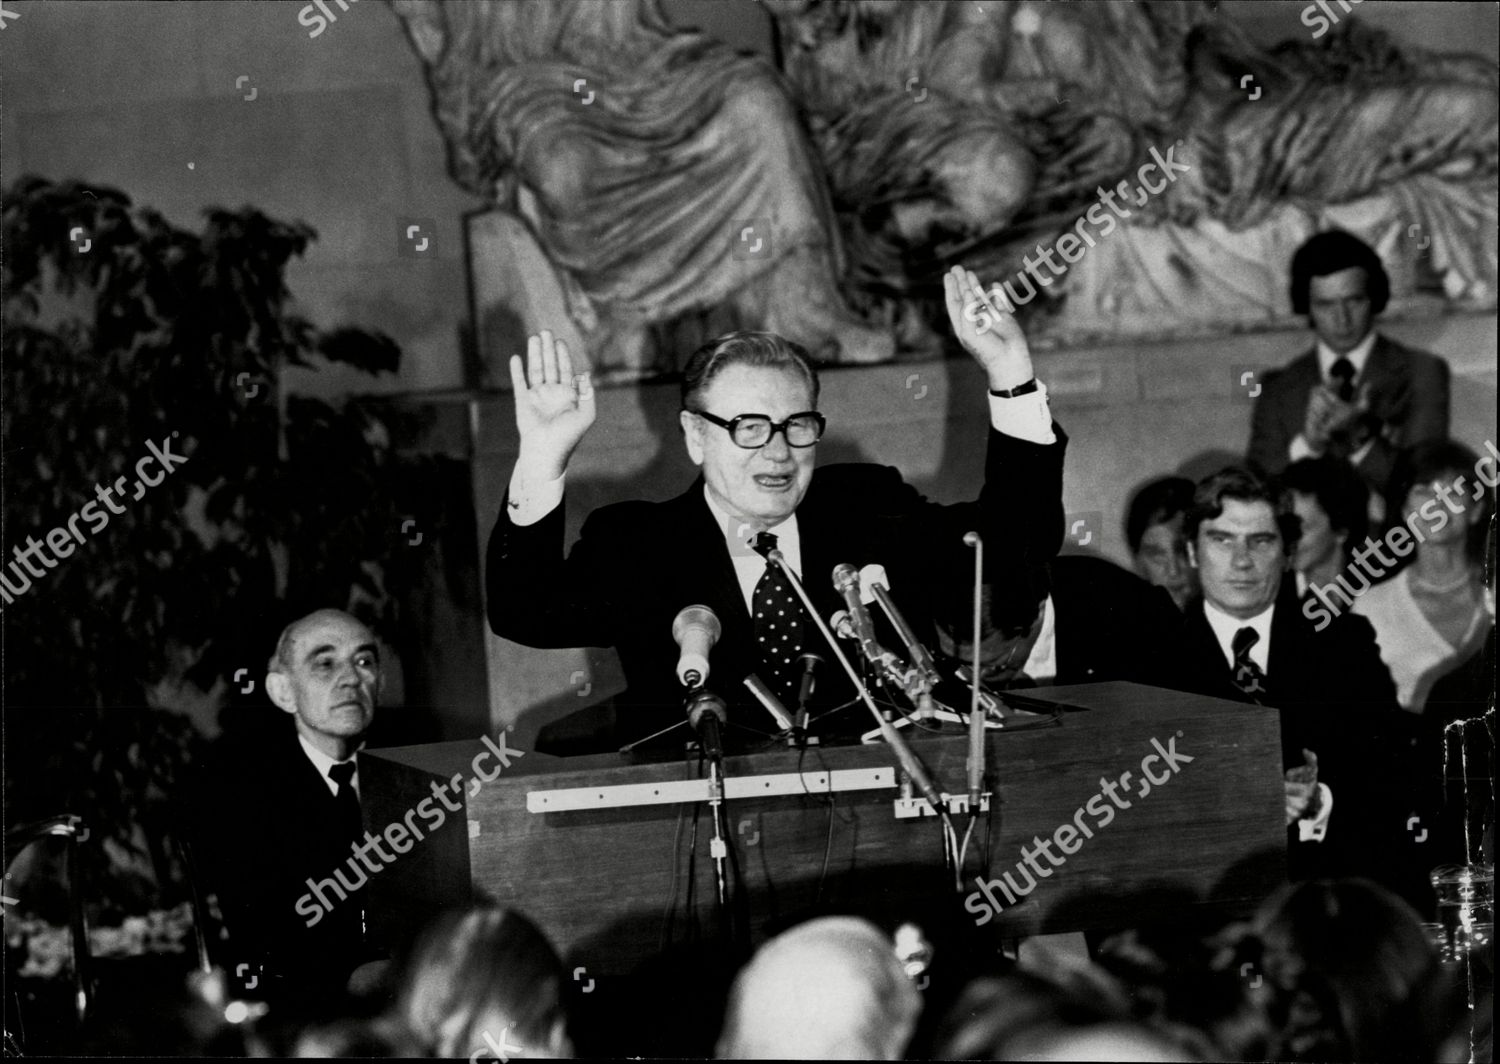 american-vice-president-nelson-rockefeller-addresses-a-crowd-at-the-british-museum-shutterstock-editorial-2805475a.jpg